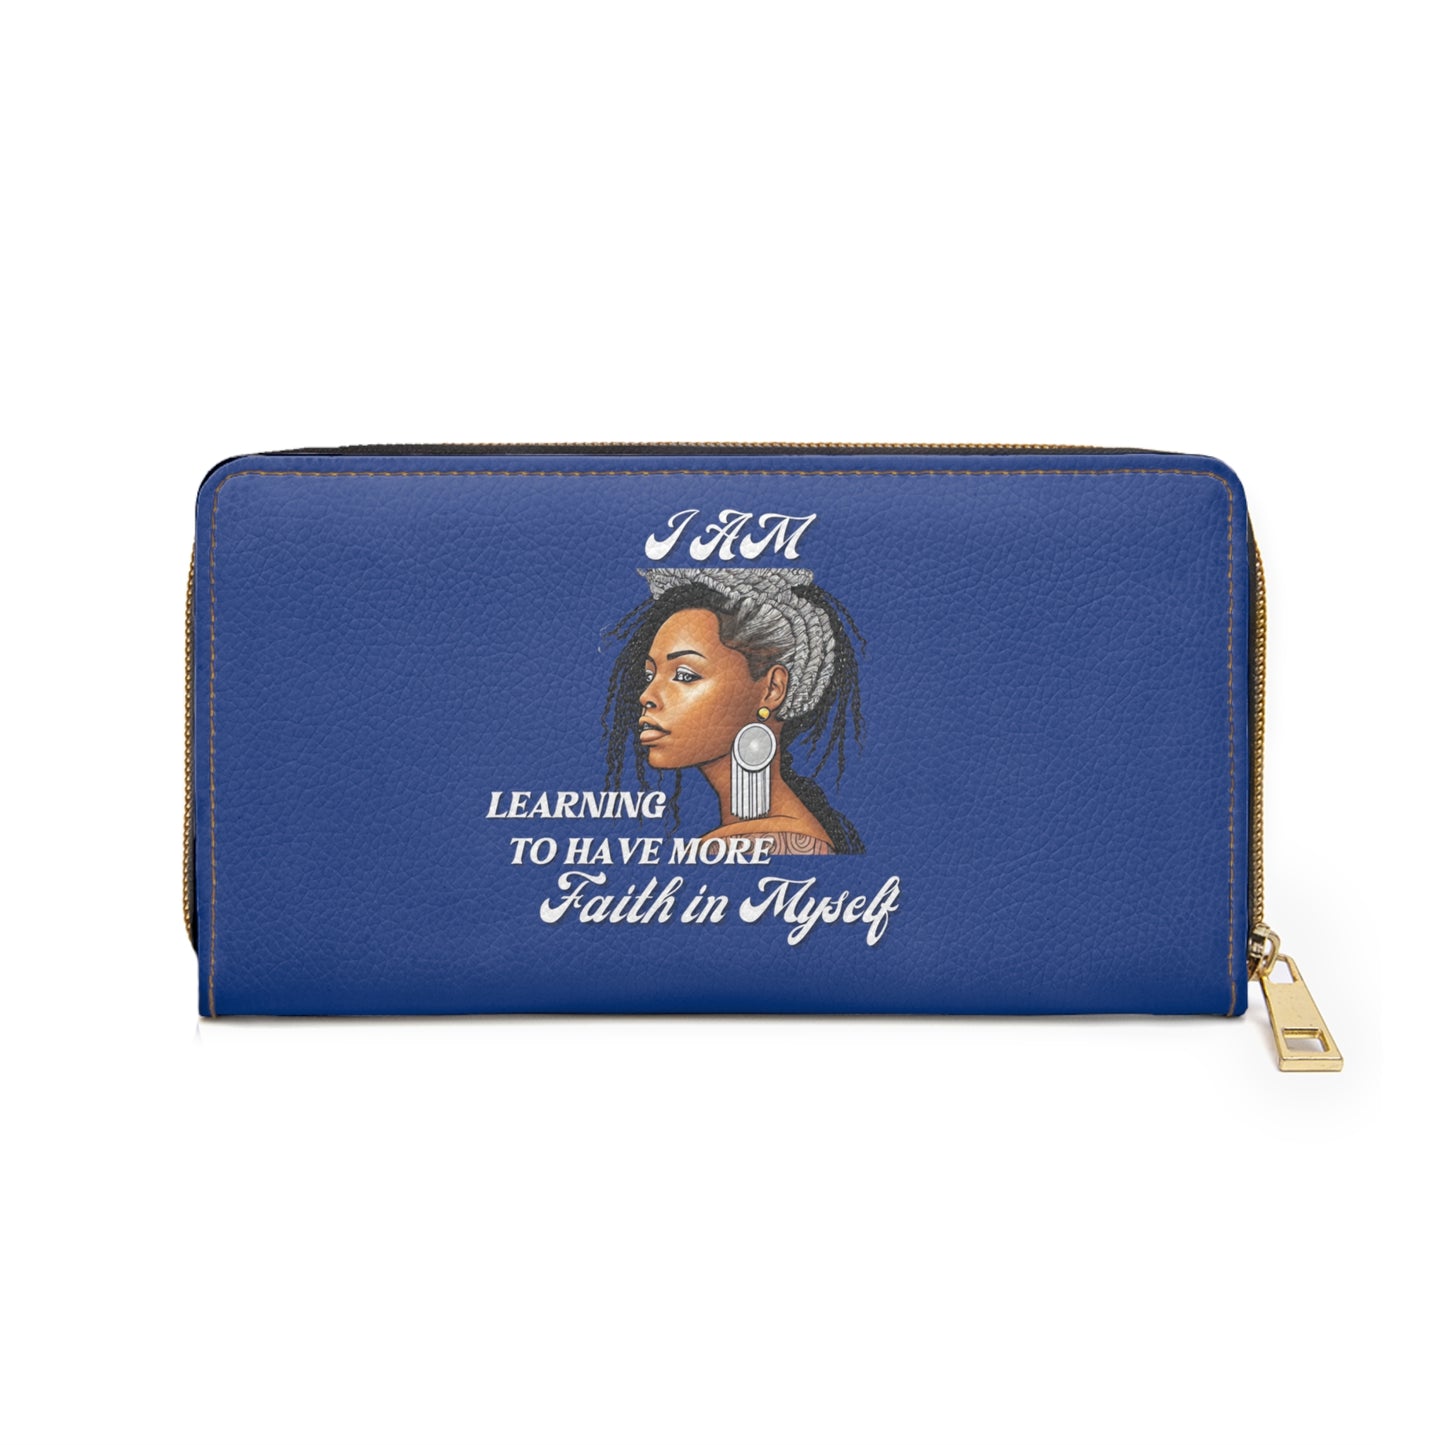 " Faith In Myself" -Positive Afrocentric Affirmation Vegan Leather Wallet Bag- Empower Your Style and Self-Love; Blue Wallet